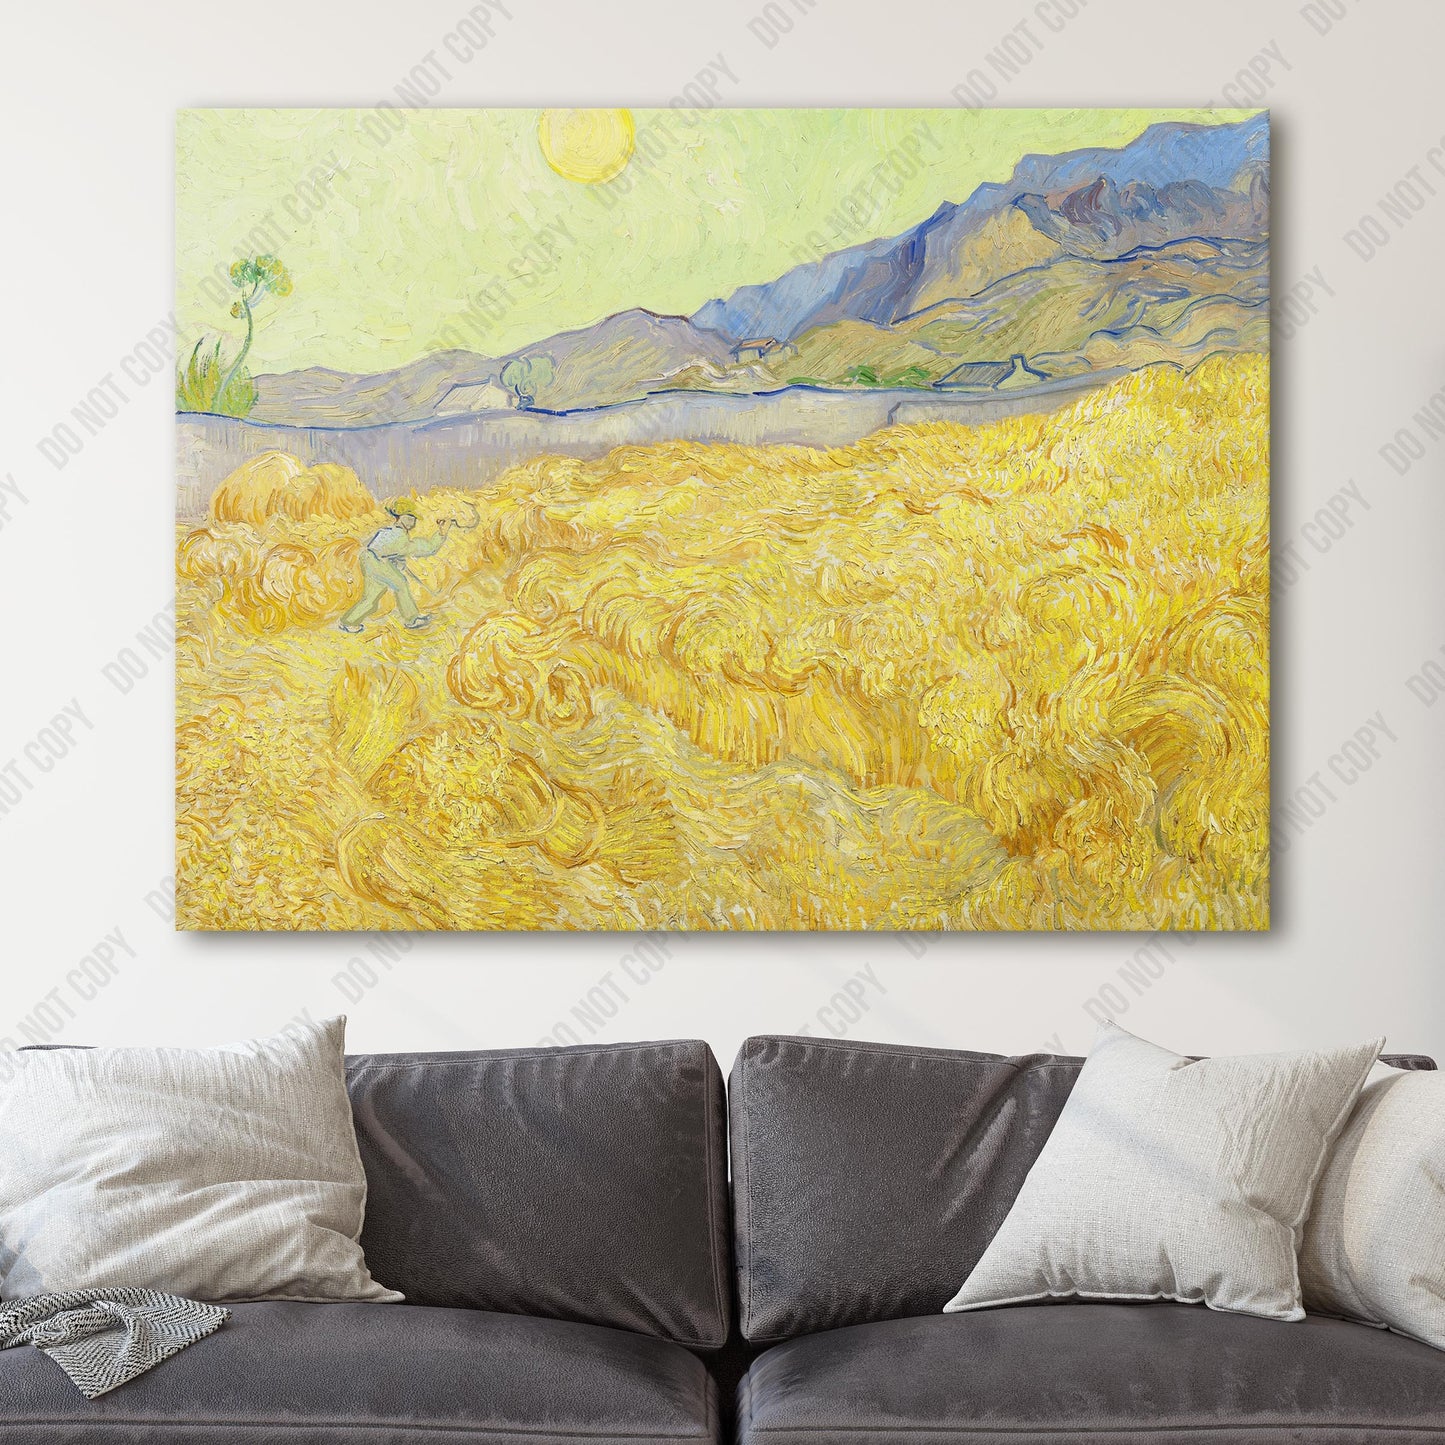 Wheatfield with a Reaper (1889) by Van Gogh